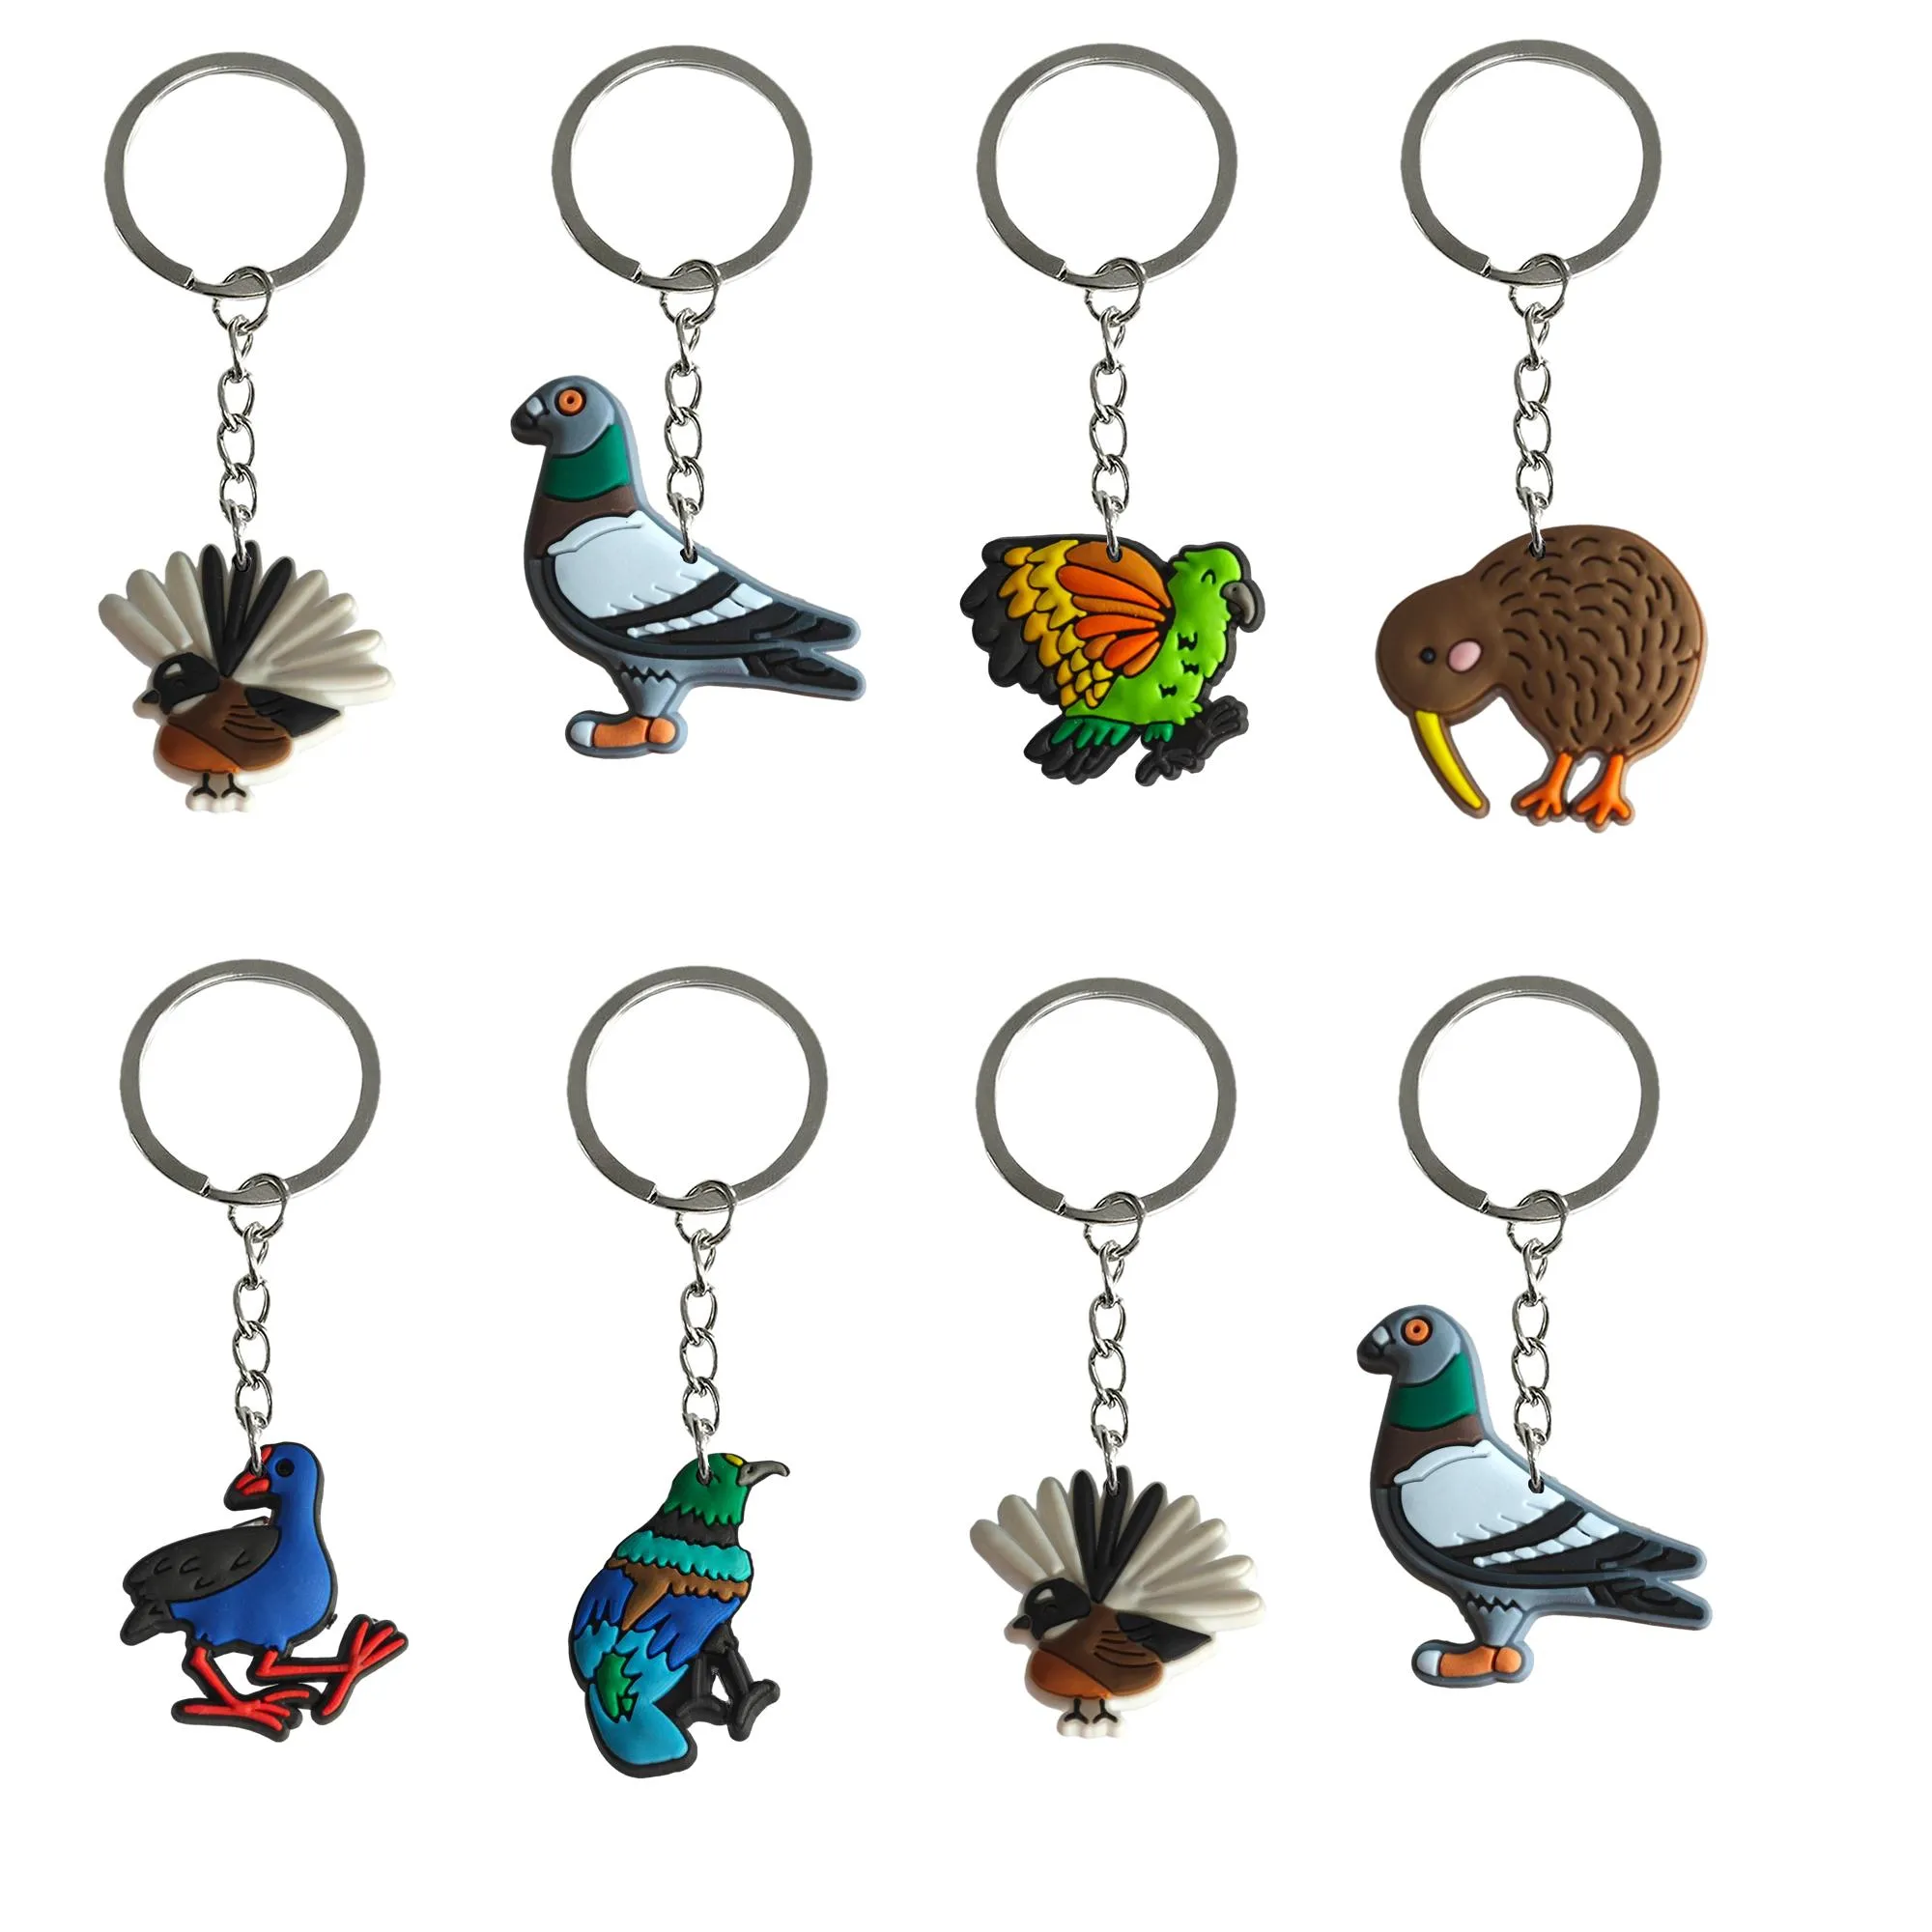 Other Fashion Accessories Bird Keychain Keyrings For Bags Keychains Boys Party Favors Keyring Suitable Schoolbag Key Chain Backpack Ha Otvsf